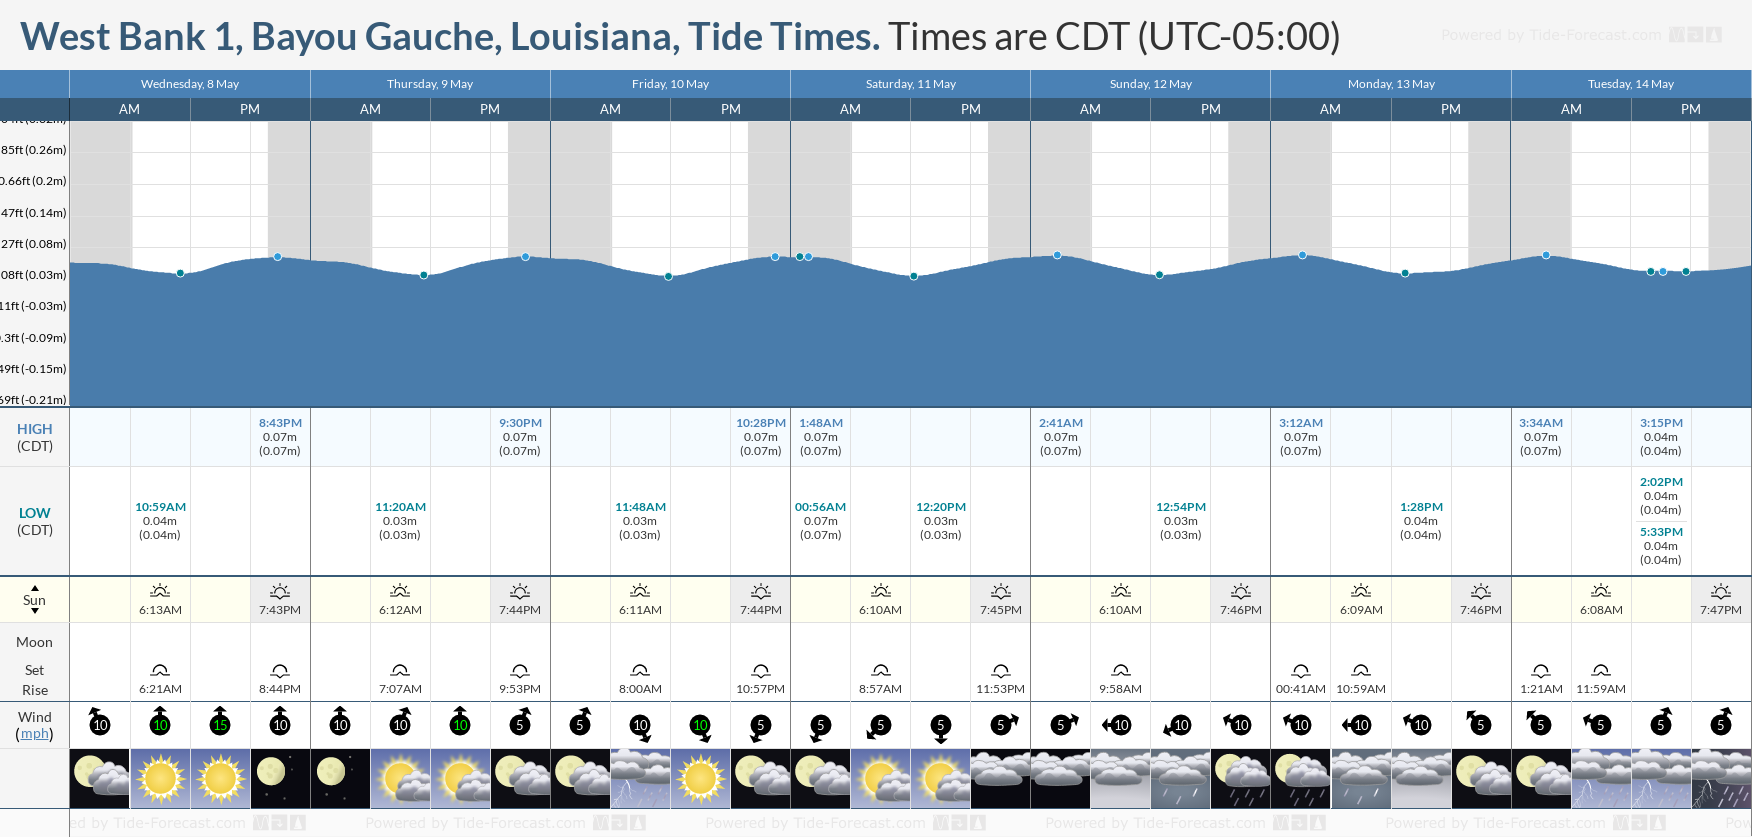 West Bank 1, Bayou Gauche, Louisiana Tide Chart including high and low tide times for the next 7 days